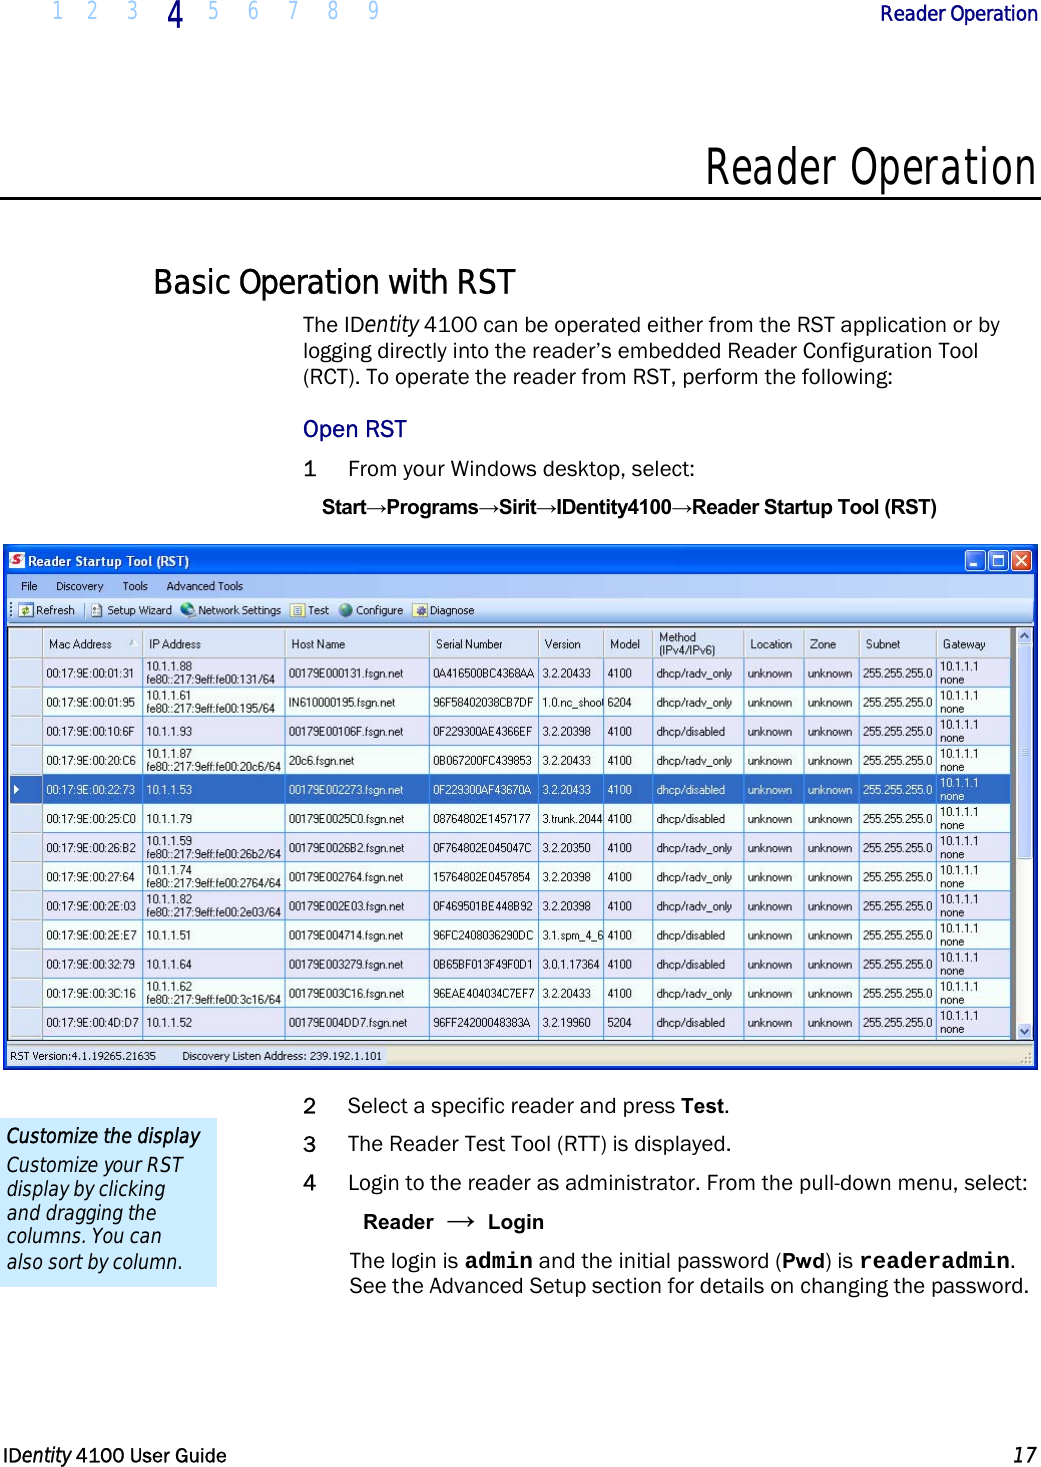  1 2 3 4 5 6 7 8 9            Reader Operation   IDentity 4100 User Guide  17  Reader Operation  Basic Operation with RST The IDentity 4100 can be operated either from the RST application or by logging directly into the reader’s embedded Reader Configuration Tool (RCT). To operate the reader from RST, perform the following: Open RST 1 From your Windows desktop, select: Start→Programs→Sirit→IDentity4100→Reader Startup Tool (RST)  2 Select a specific reader and press Test.  3 The Reader Test Tool (RTT) is displayed. 4 Login to the reader as administrator. From the pull-down menu, select: Reader → Login The login is admin and the initial password (Pwd) is readeradmin. See the Advanced Setup section for details on changing the password. Customize the display Customize your RST display by clicking and dragging the columns. You can also sort by column. 